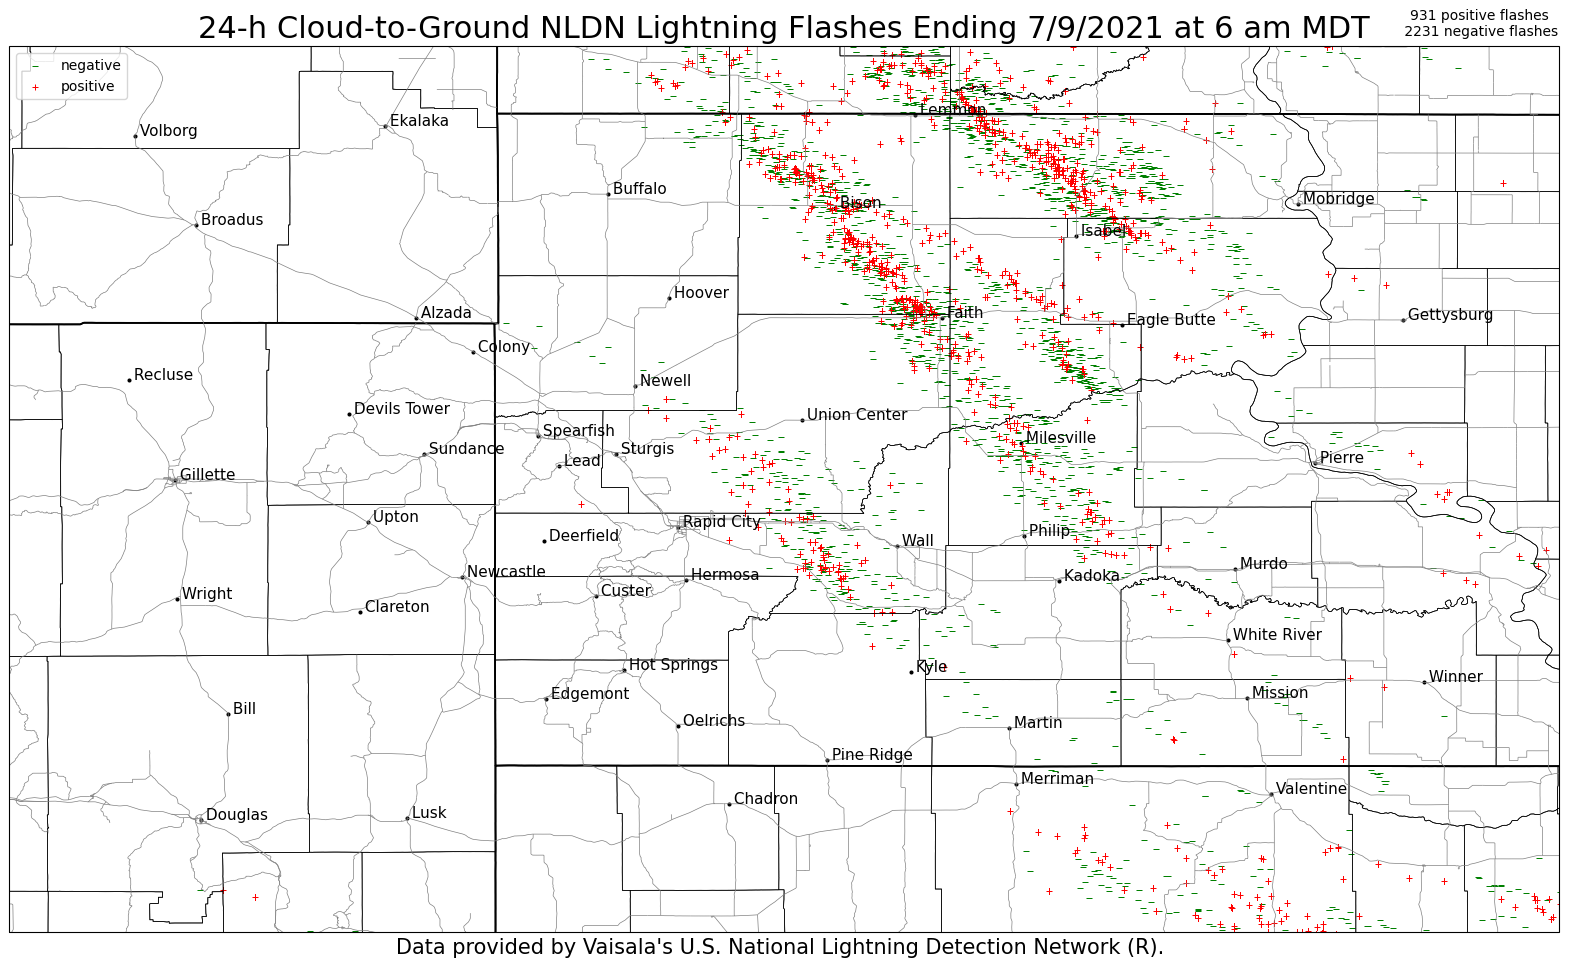 24-h Cloud-to-Ground NLDN Lightning Flashes Ending 7/9/2021 at 6 am MDT